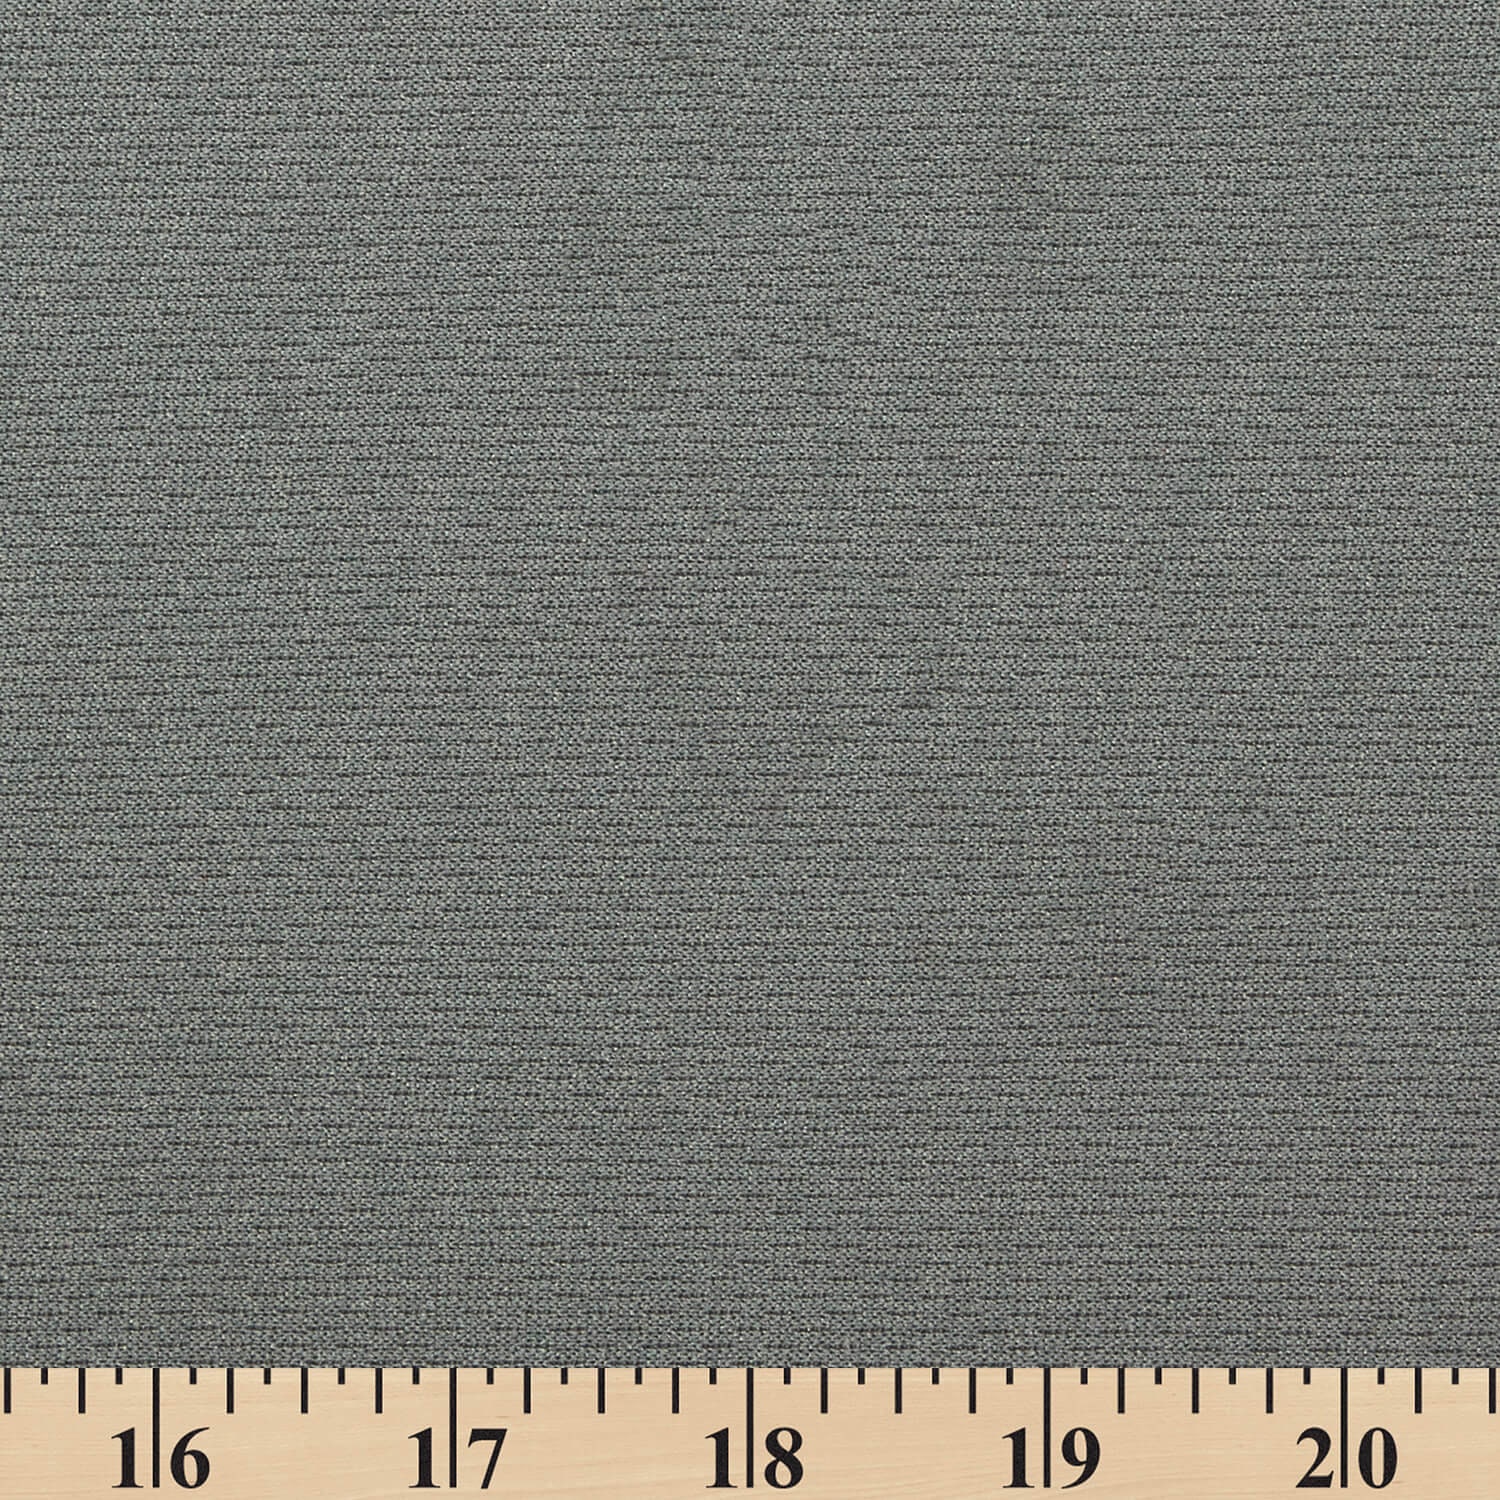 Mottled Blue-Grey Microfiber Fabric, Upholstery, Heavy Weight, 54 Wide